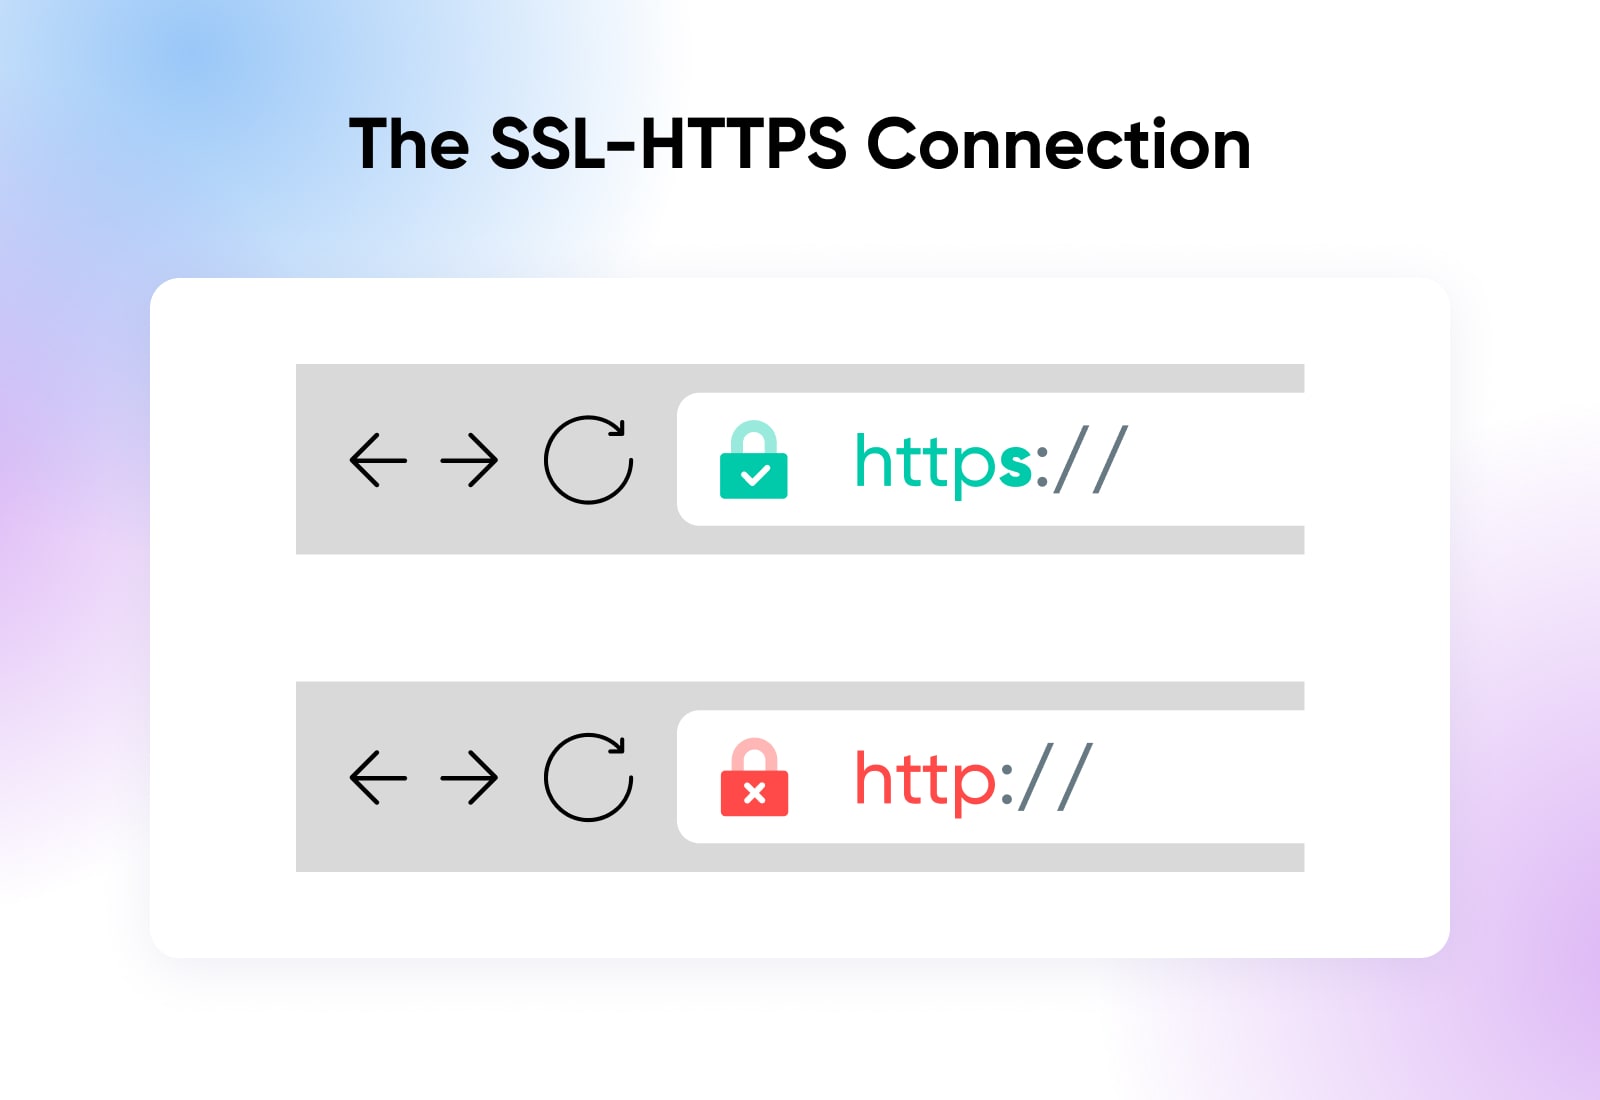 The SSL-HTTPS Connection